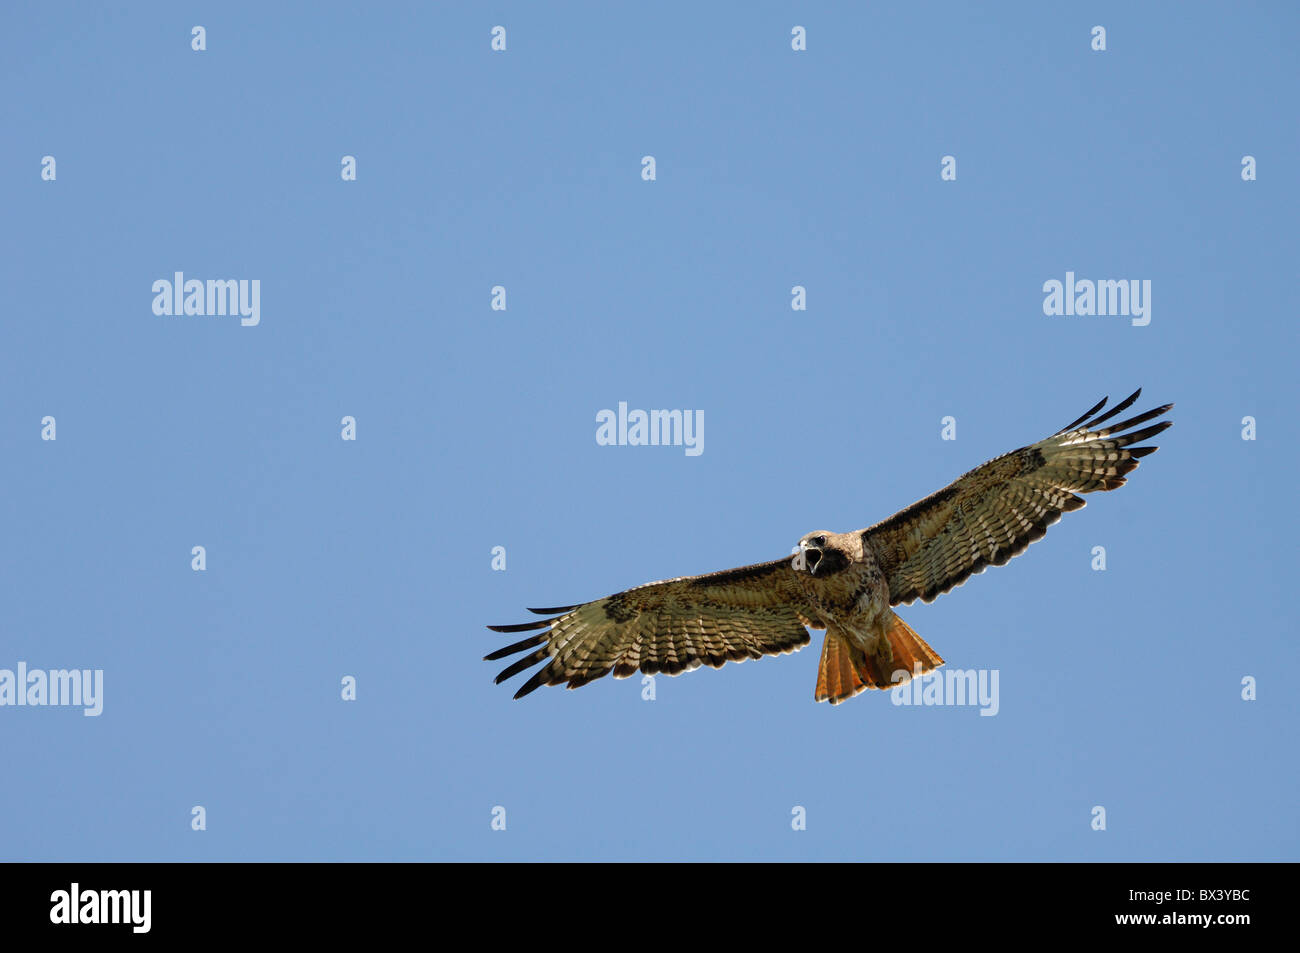 Red-tailed hawk (Buteo jamaicensis), hovering Stock Photo